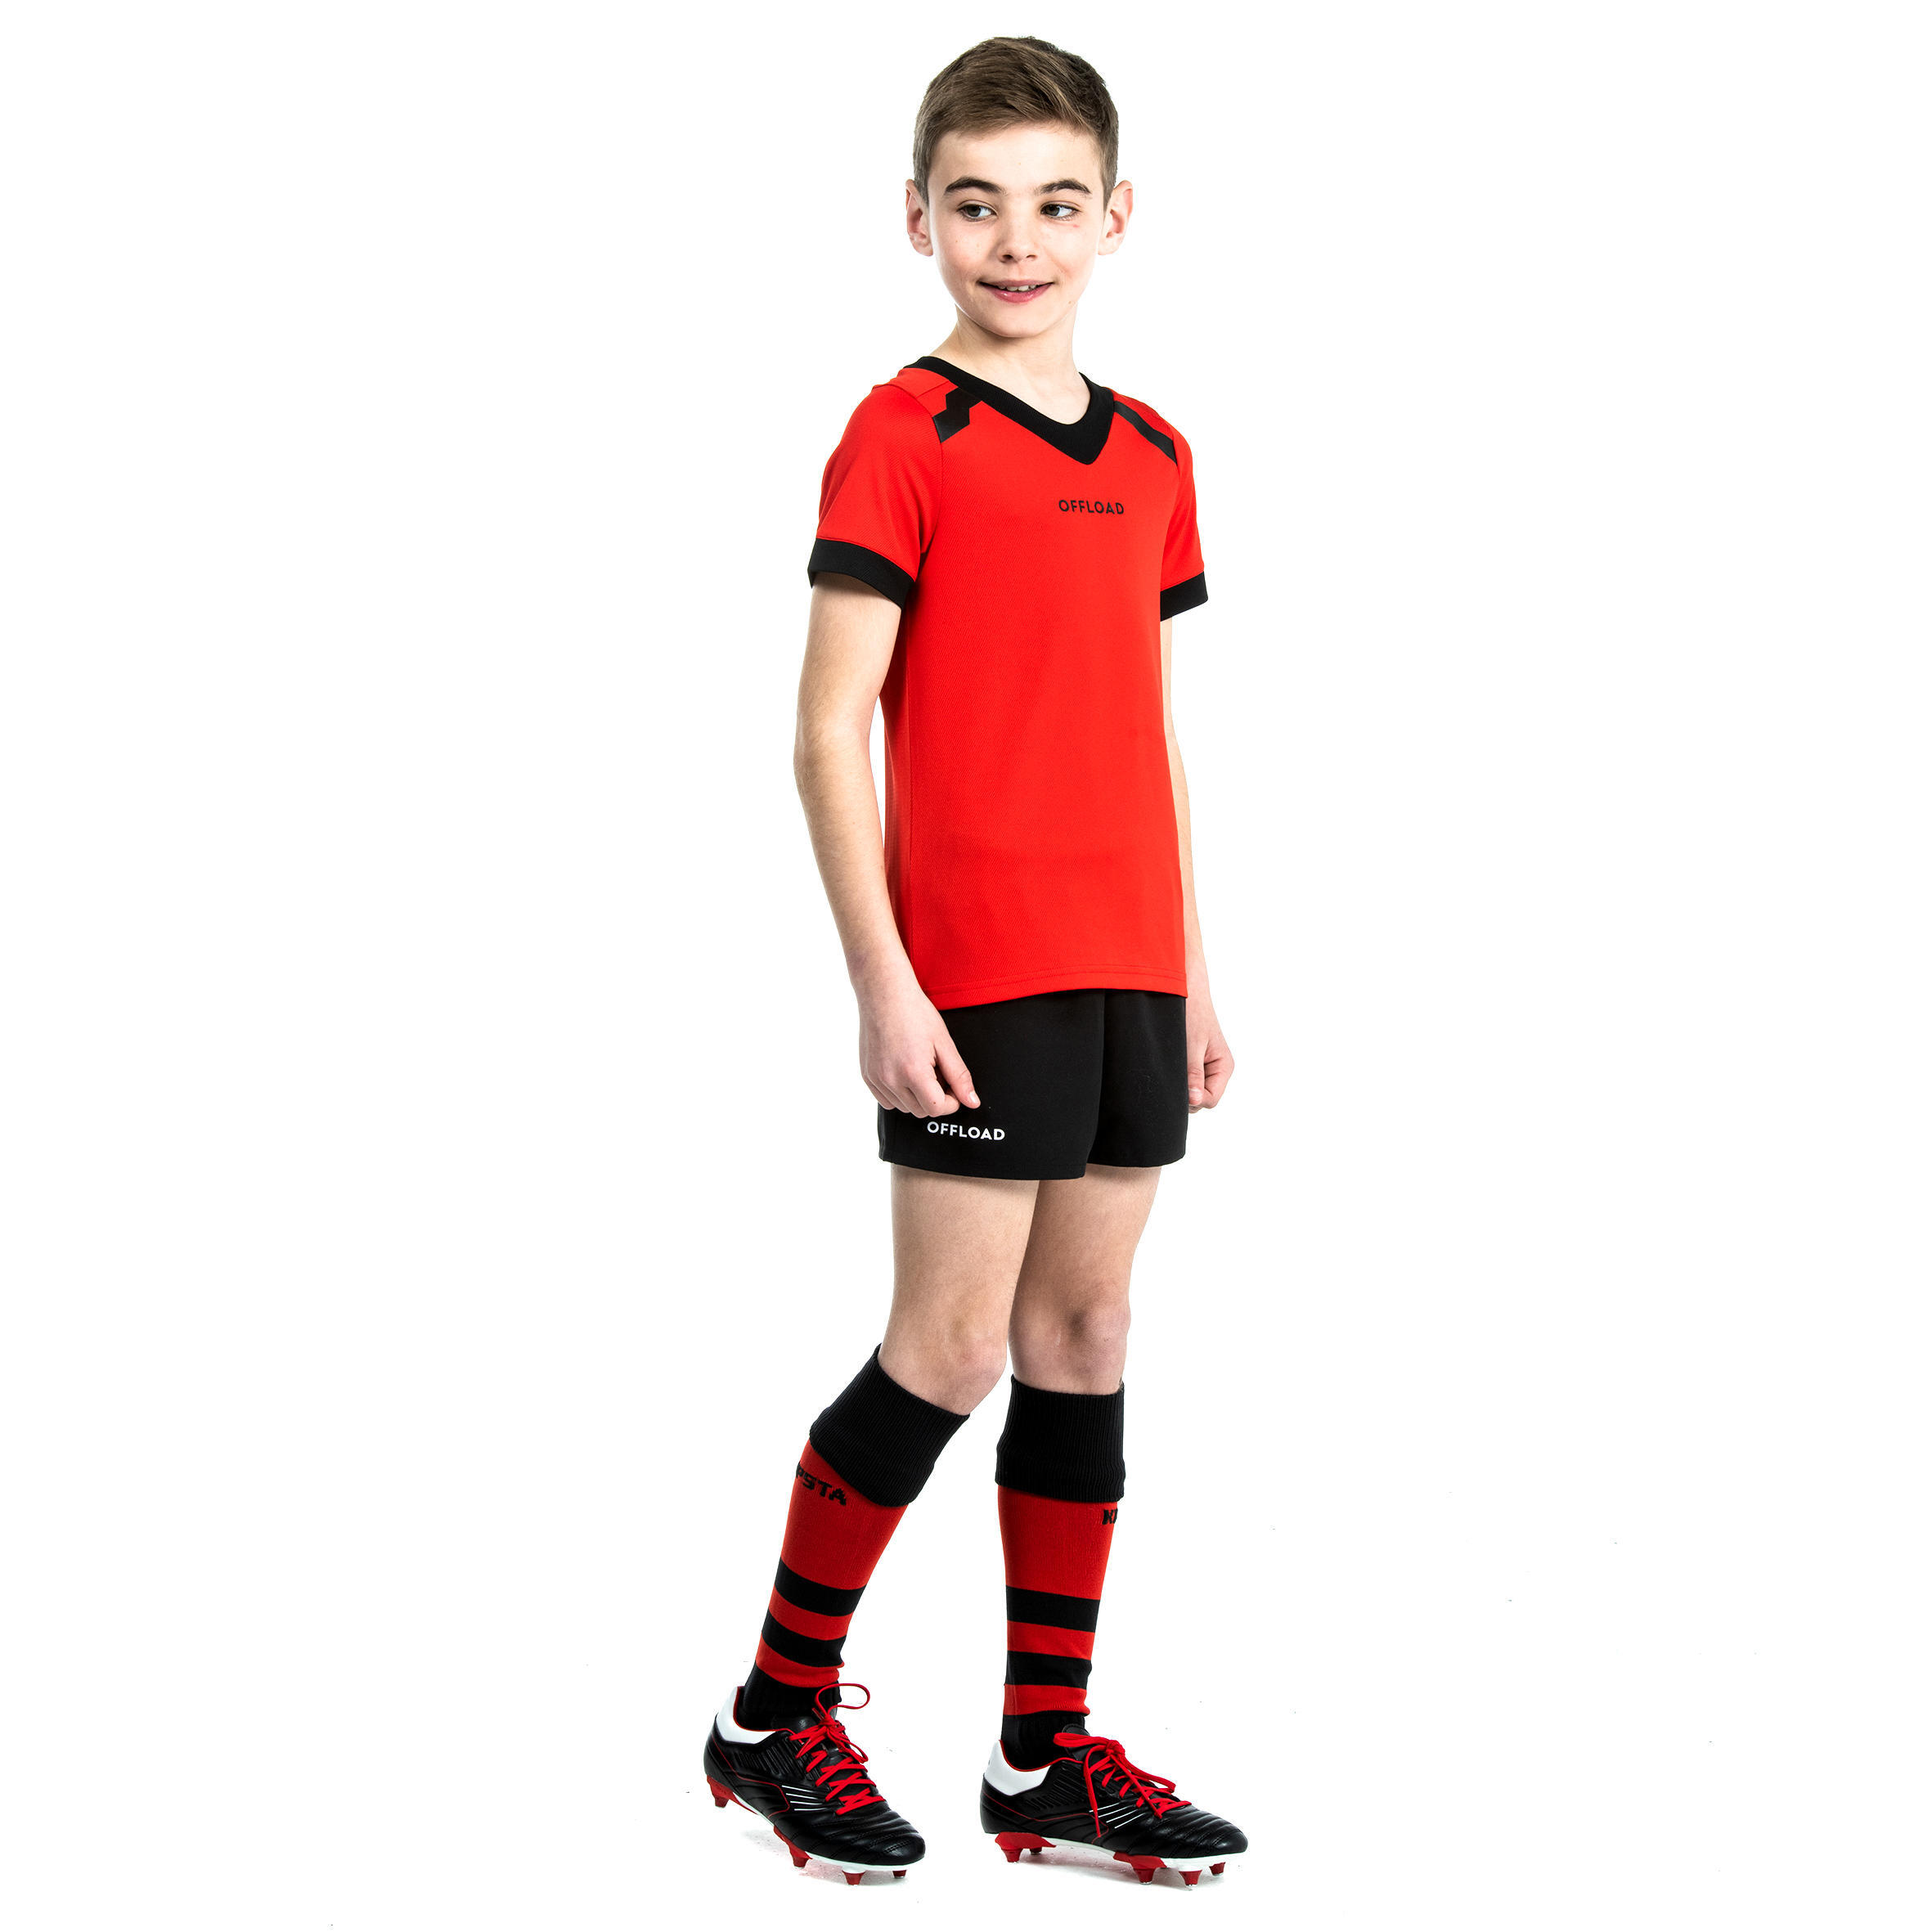 Kids' Rugby Shorts with Pockets R100 - Black 4/7